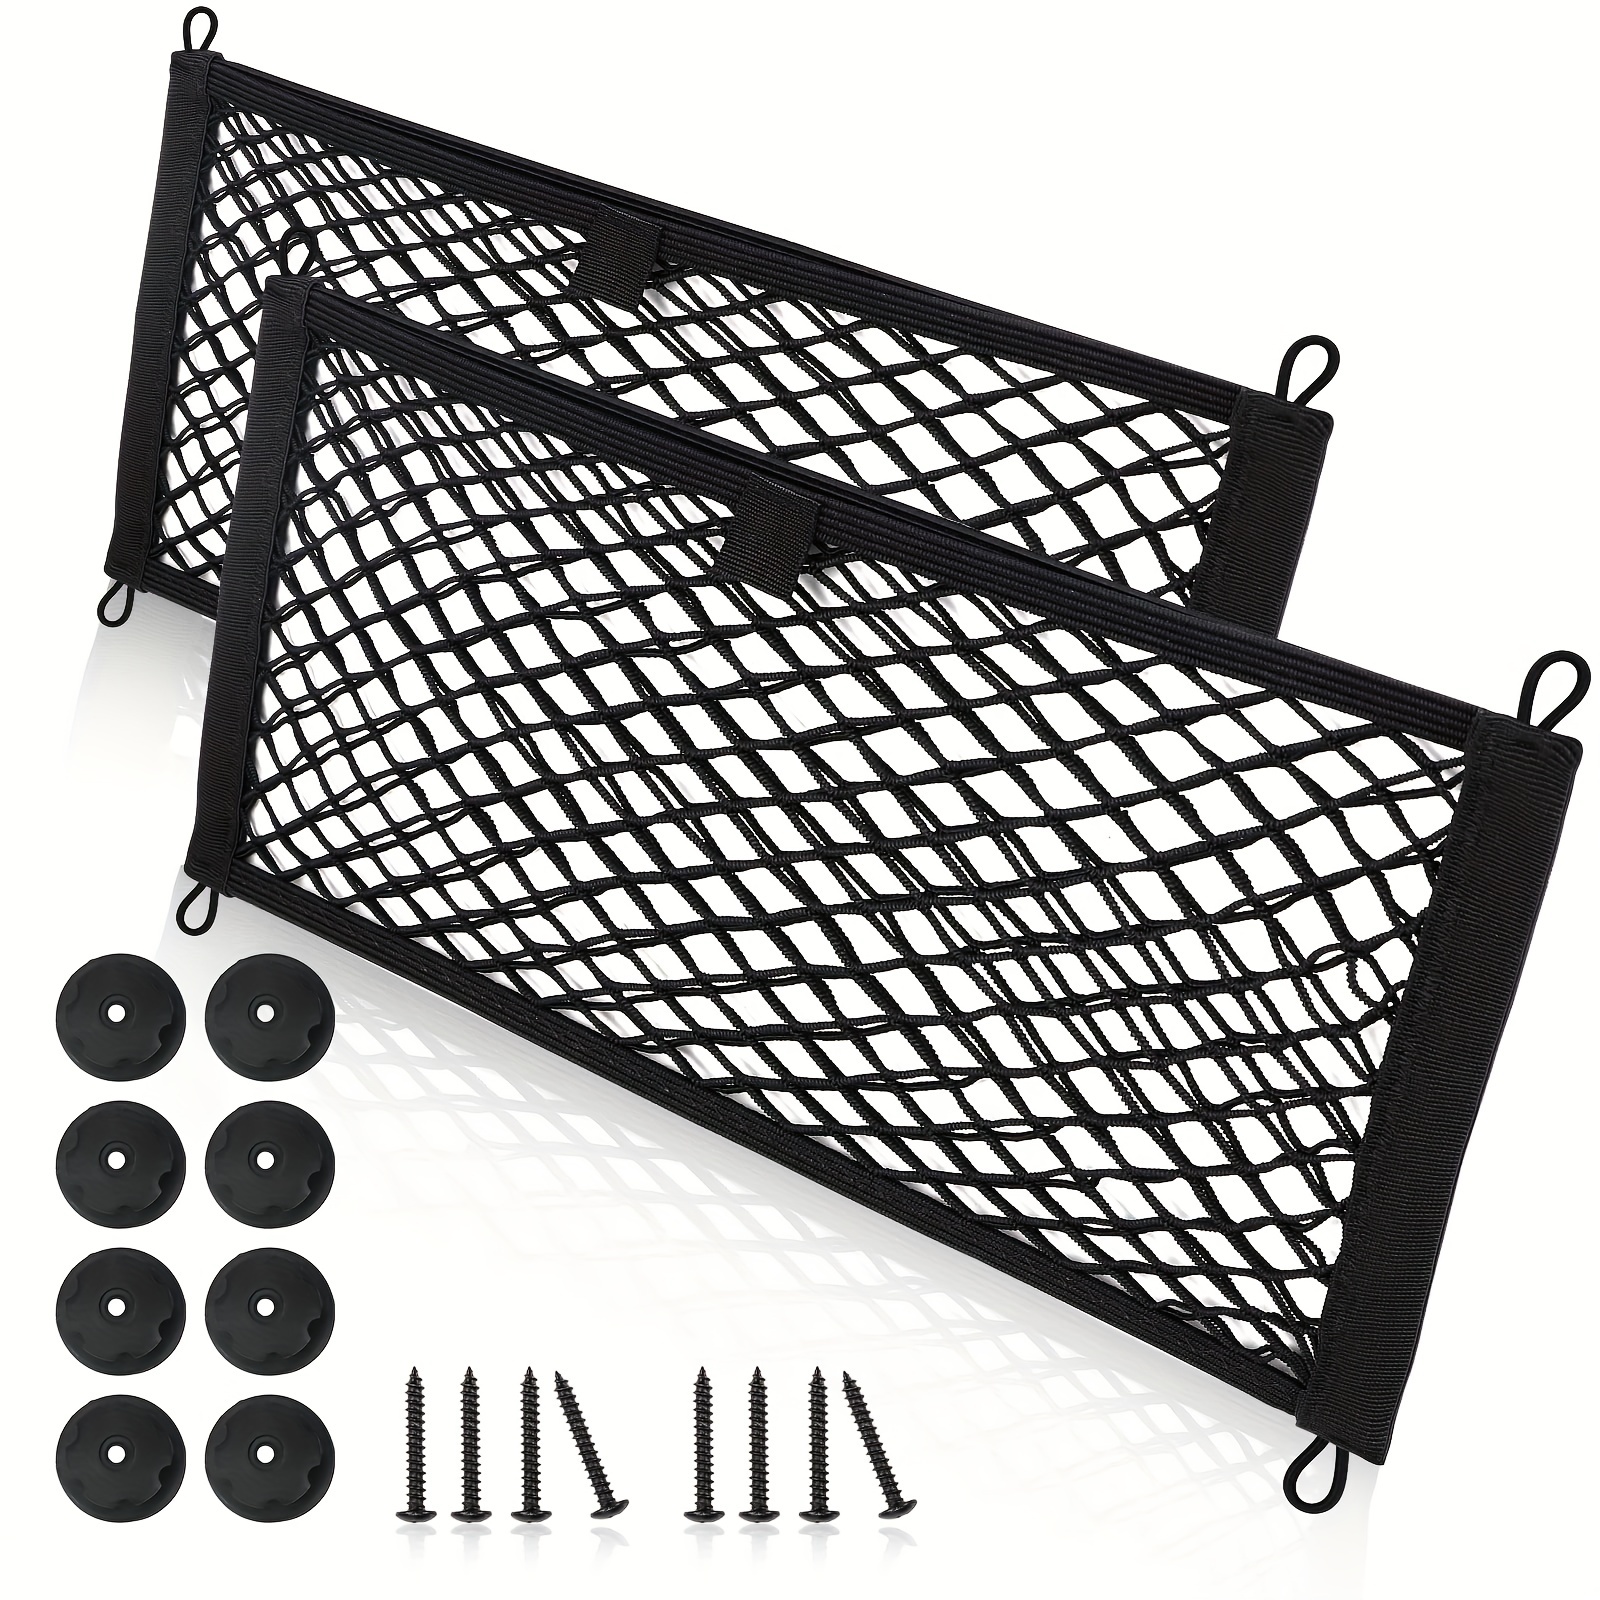 Automotive Cargo Nets For Suv Trunk Net Organizer For Caruniversal Storage Cargo  Net With Hookshigh Elastic Car Rear Cargo Net Stretches To 66